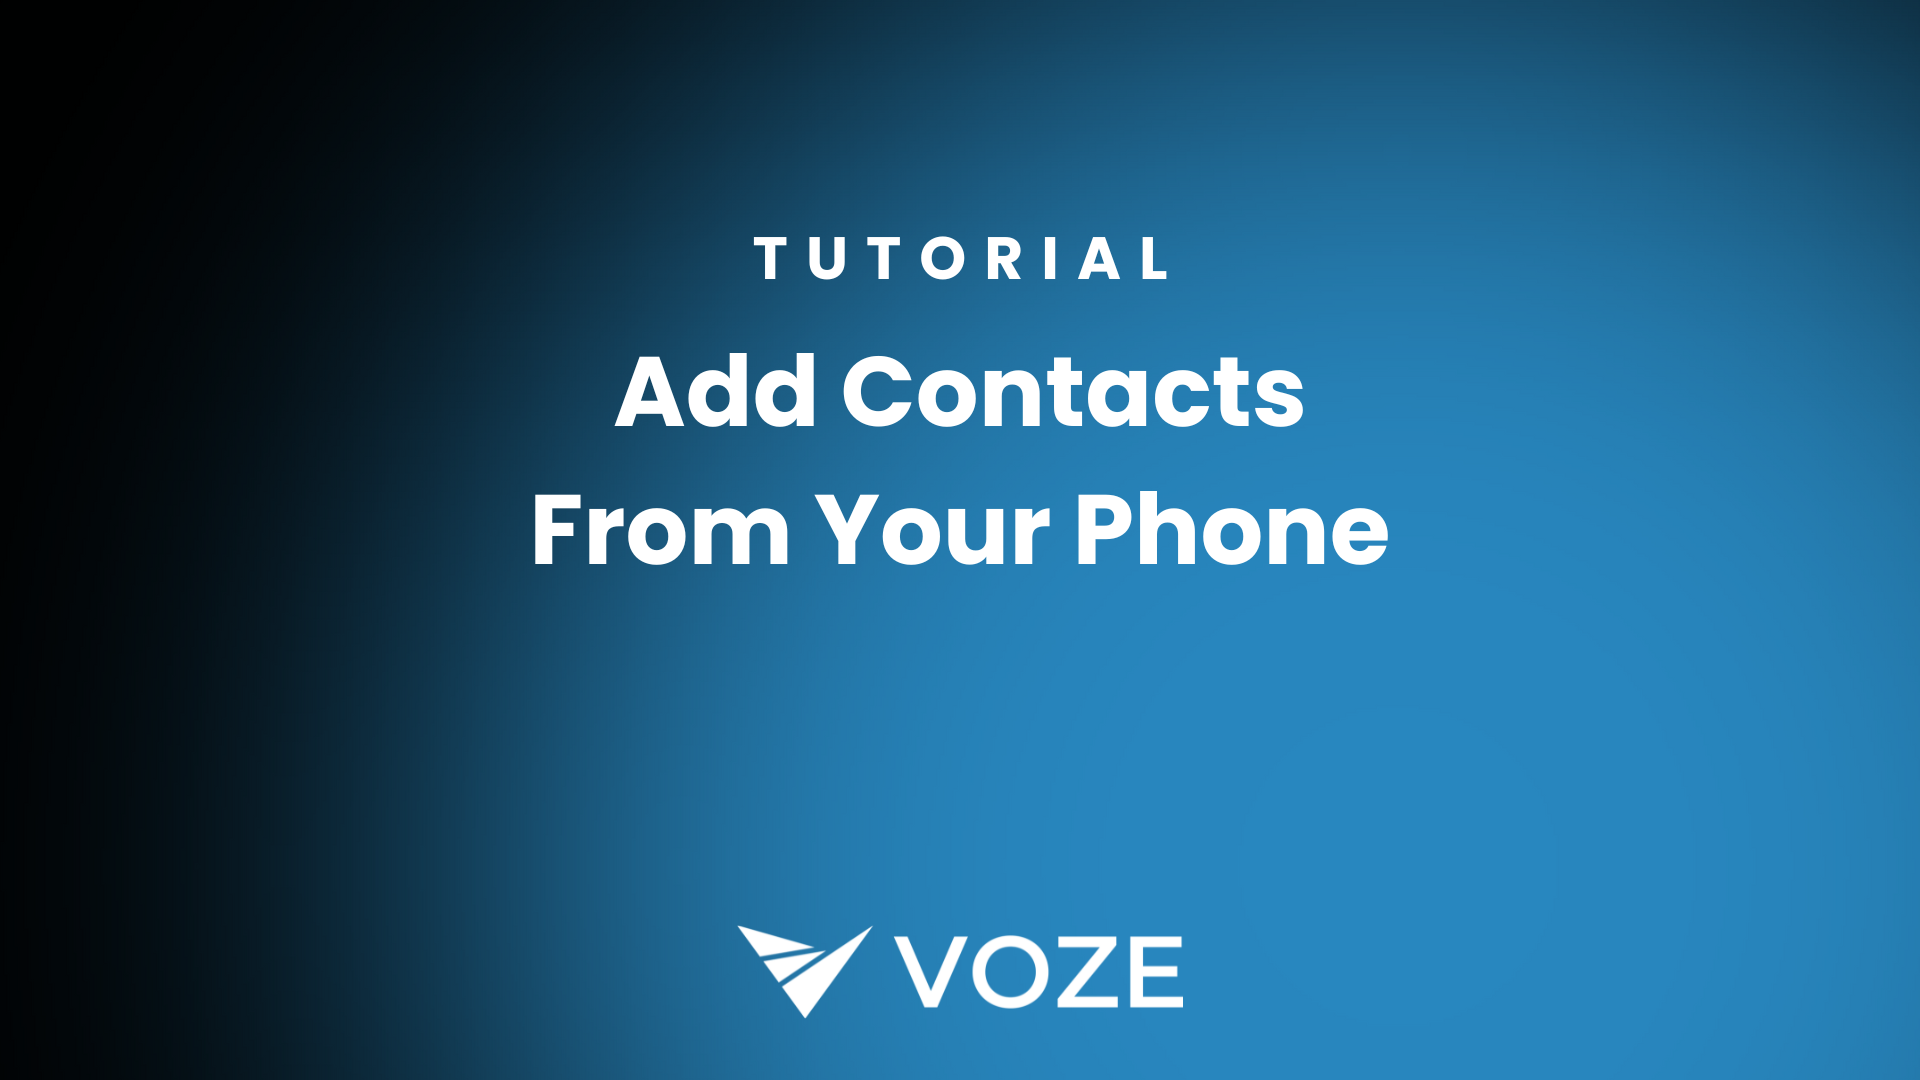 How To Add Contacts To Voze From Your Phone